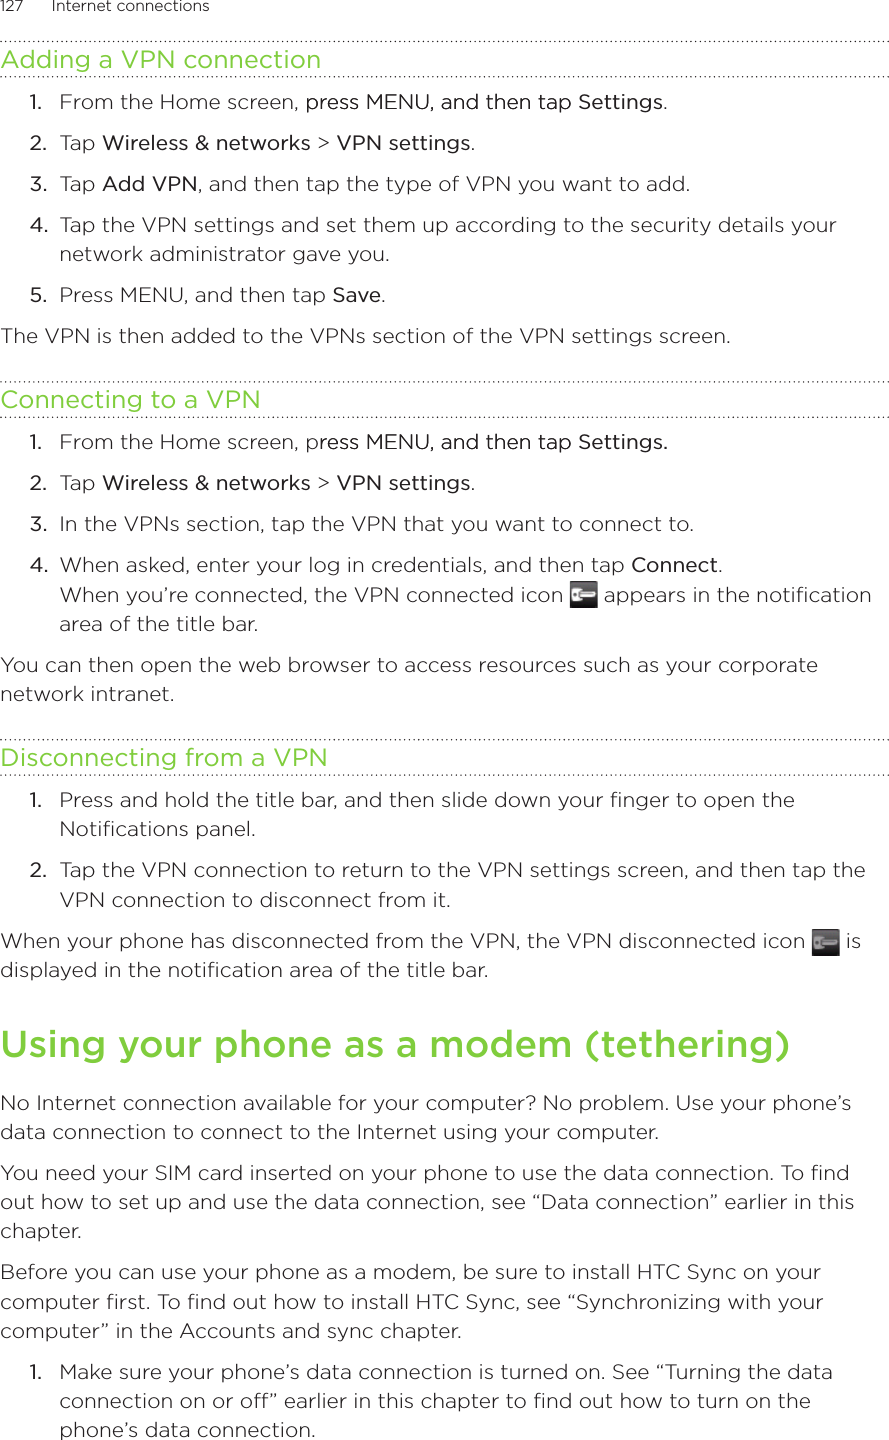 127      Internet connections      Adding a VPN connectionFrom the Home screen, press MENU, and then tappress MENU, and then tap Settings. Tap Wireless &amp; networks &gt; VPN settings.Tap Add VPN, and then tap the type of VPN you want to add.Tap the VPN settings and set them up according to the security details your network administrator gave you.Press MENU, and then tap Save.The VPN is then added to the VPNs section of the VPN settings screen.Connecting to a VPNFrom the Home screen, press MENU, and then tapress MENU, and then tap Settings. Tap Wireless &amp; networks &gt; VPN settings.In the VPNs section, tap the VPN that you want to connect to.When asked, enter your log in credentials, and then tap Connect. When you’re connected, the VPN connected icon   appears in the notification area of the title bar.You can then open the web browser to access resources such as your corporate network intranet.Disconnecting from a VPNPress and hold the title bar, and then slide down your finger to open the Notifications panel.Tap the VPN connection to return to the VPN settings screen, and then tap the VPN connection to disconnect from it.When your phone has disconnected from the VPN, the VPN disconnected icon   is displayed in the notification area of the title bar.Using your phone as a modem (tethering)No Internet connection available for your computer? No problem. Use your phone’s data connection to connect to the Internet using your computer.You need your SIM card inserted on your phone to use the data connection. To find out how to set up and use the data connection, see “Data connection” earlier in this chapter.Before you can use your phone as a modem, be sure to install HTC Sync on your computer first. To find out how to install HTC Sync, see “Synchronizing with your computer” in the Accounts and sync chapter. Make sure your phone’s data connection is turned on. See “Turning the data connection on or off” earlier in this chapter to find out how to turn on the phone’s data connection.1.2.3.4.5.1.2.3.4.1.2.1.